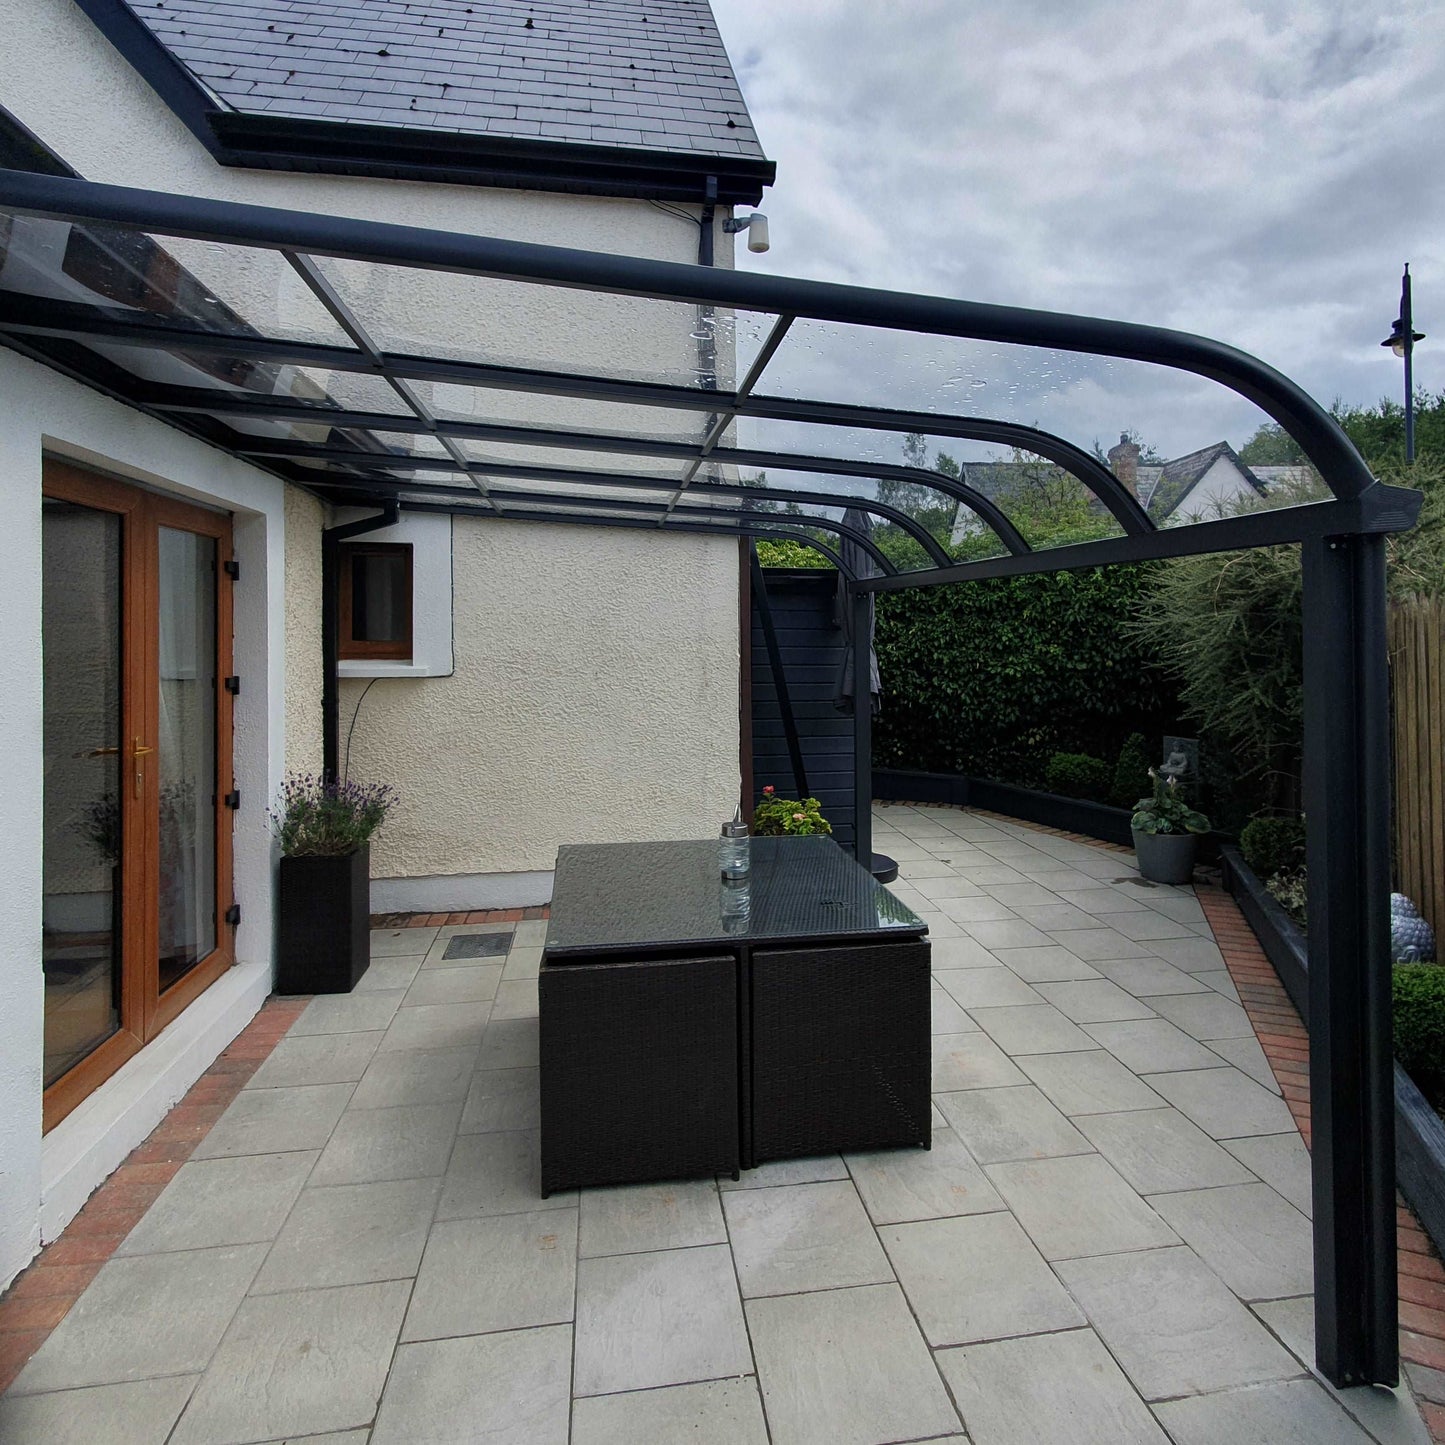 Aluminum Canopy, Composite Decking manufacturers and installers in Ireland